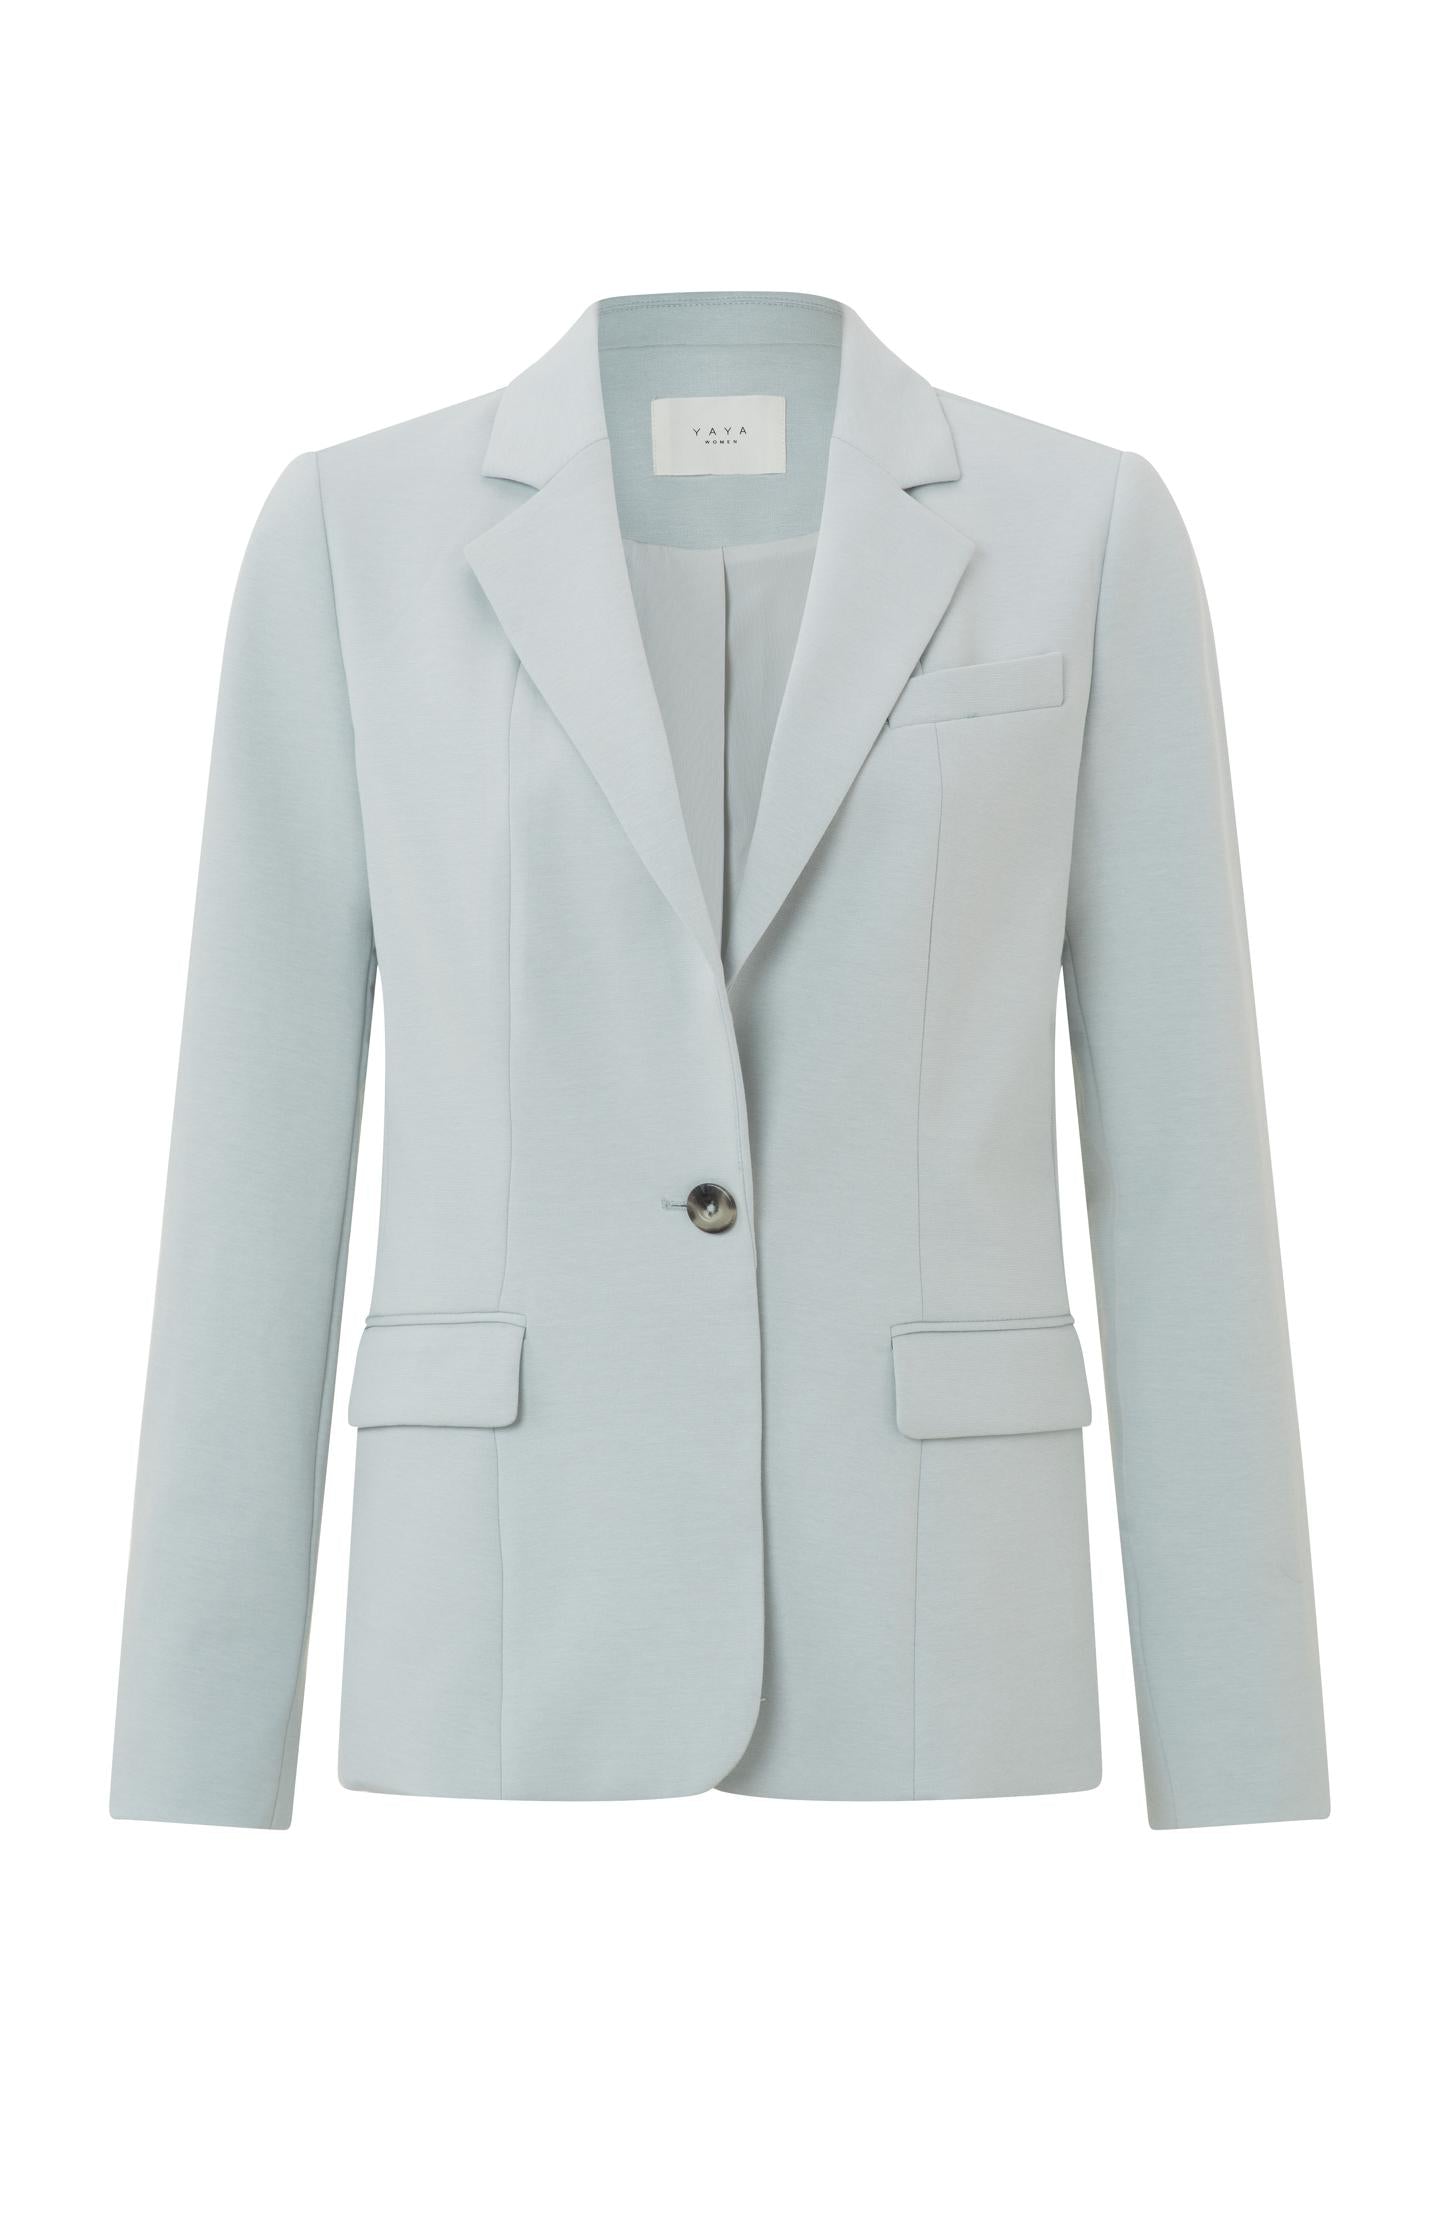 Jersey blazer with long sleeves, pockets and button - Type: product